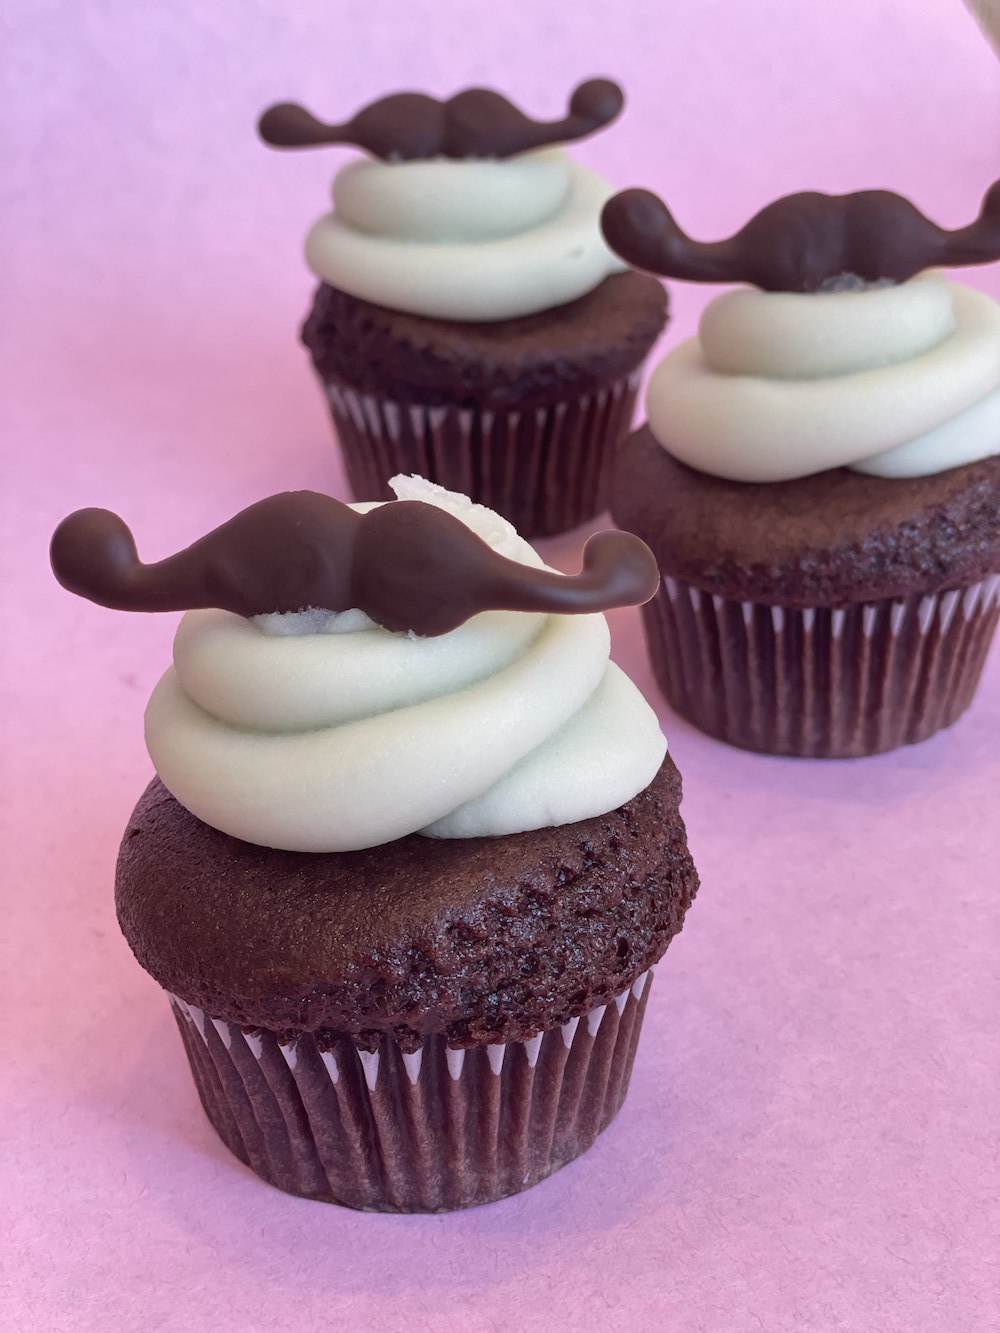 Erin McKenna's Bakery NYC At Disney Springs Celebrates Father's Day with 'Mustache' Cupcake